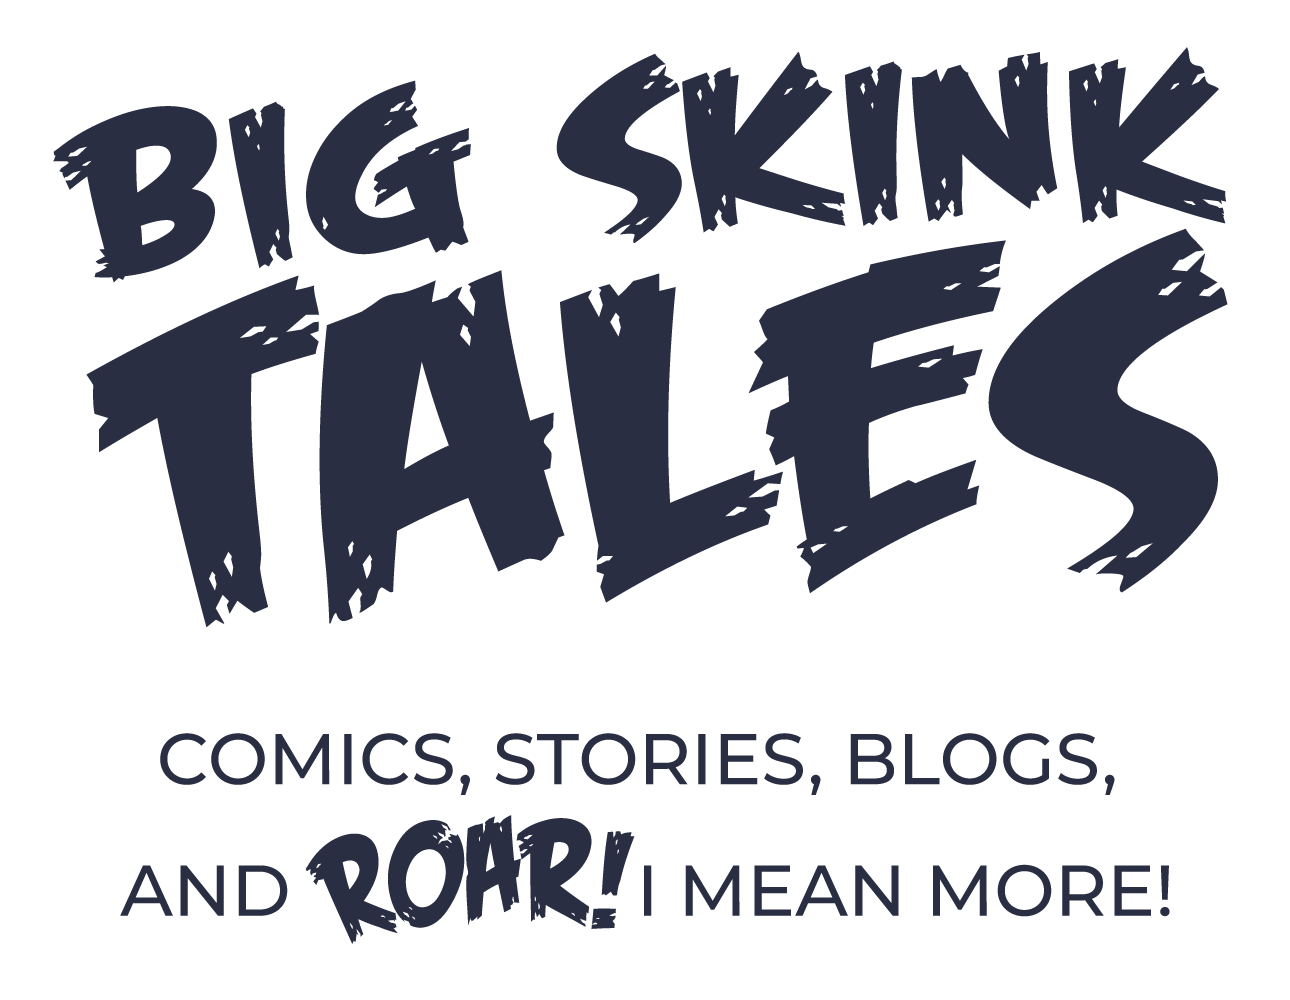 Big Skink Tales - Comics, Stories, Blogs, and Roar! I Mean More!